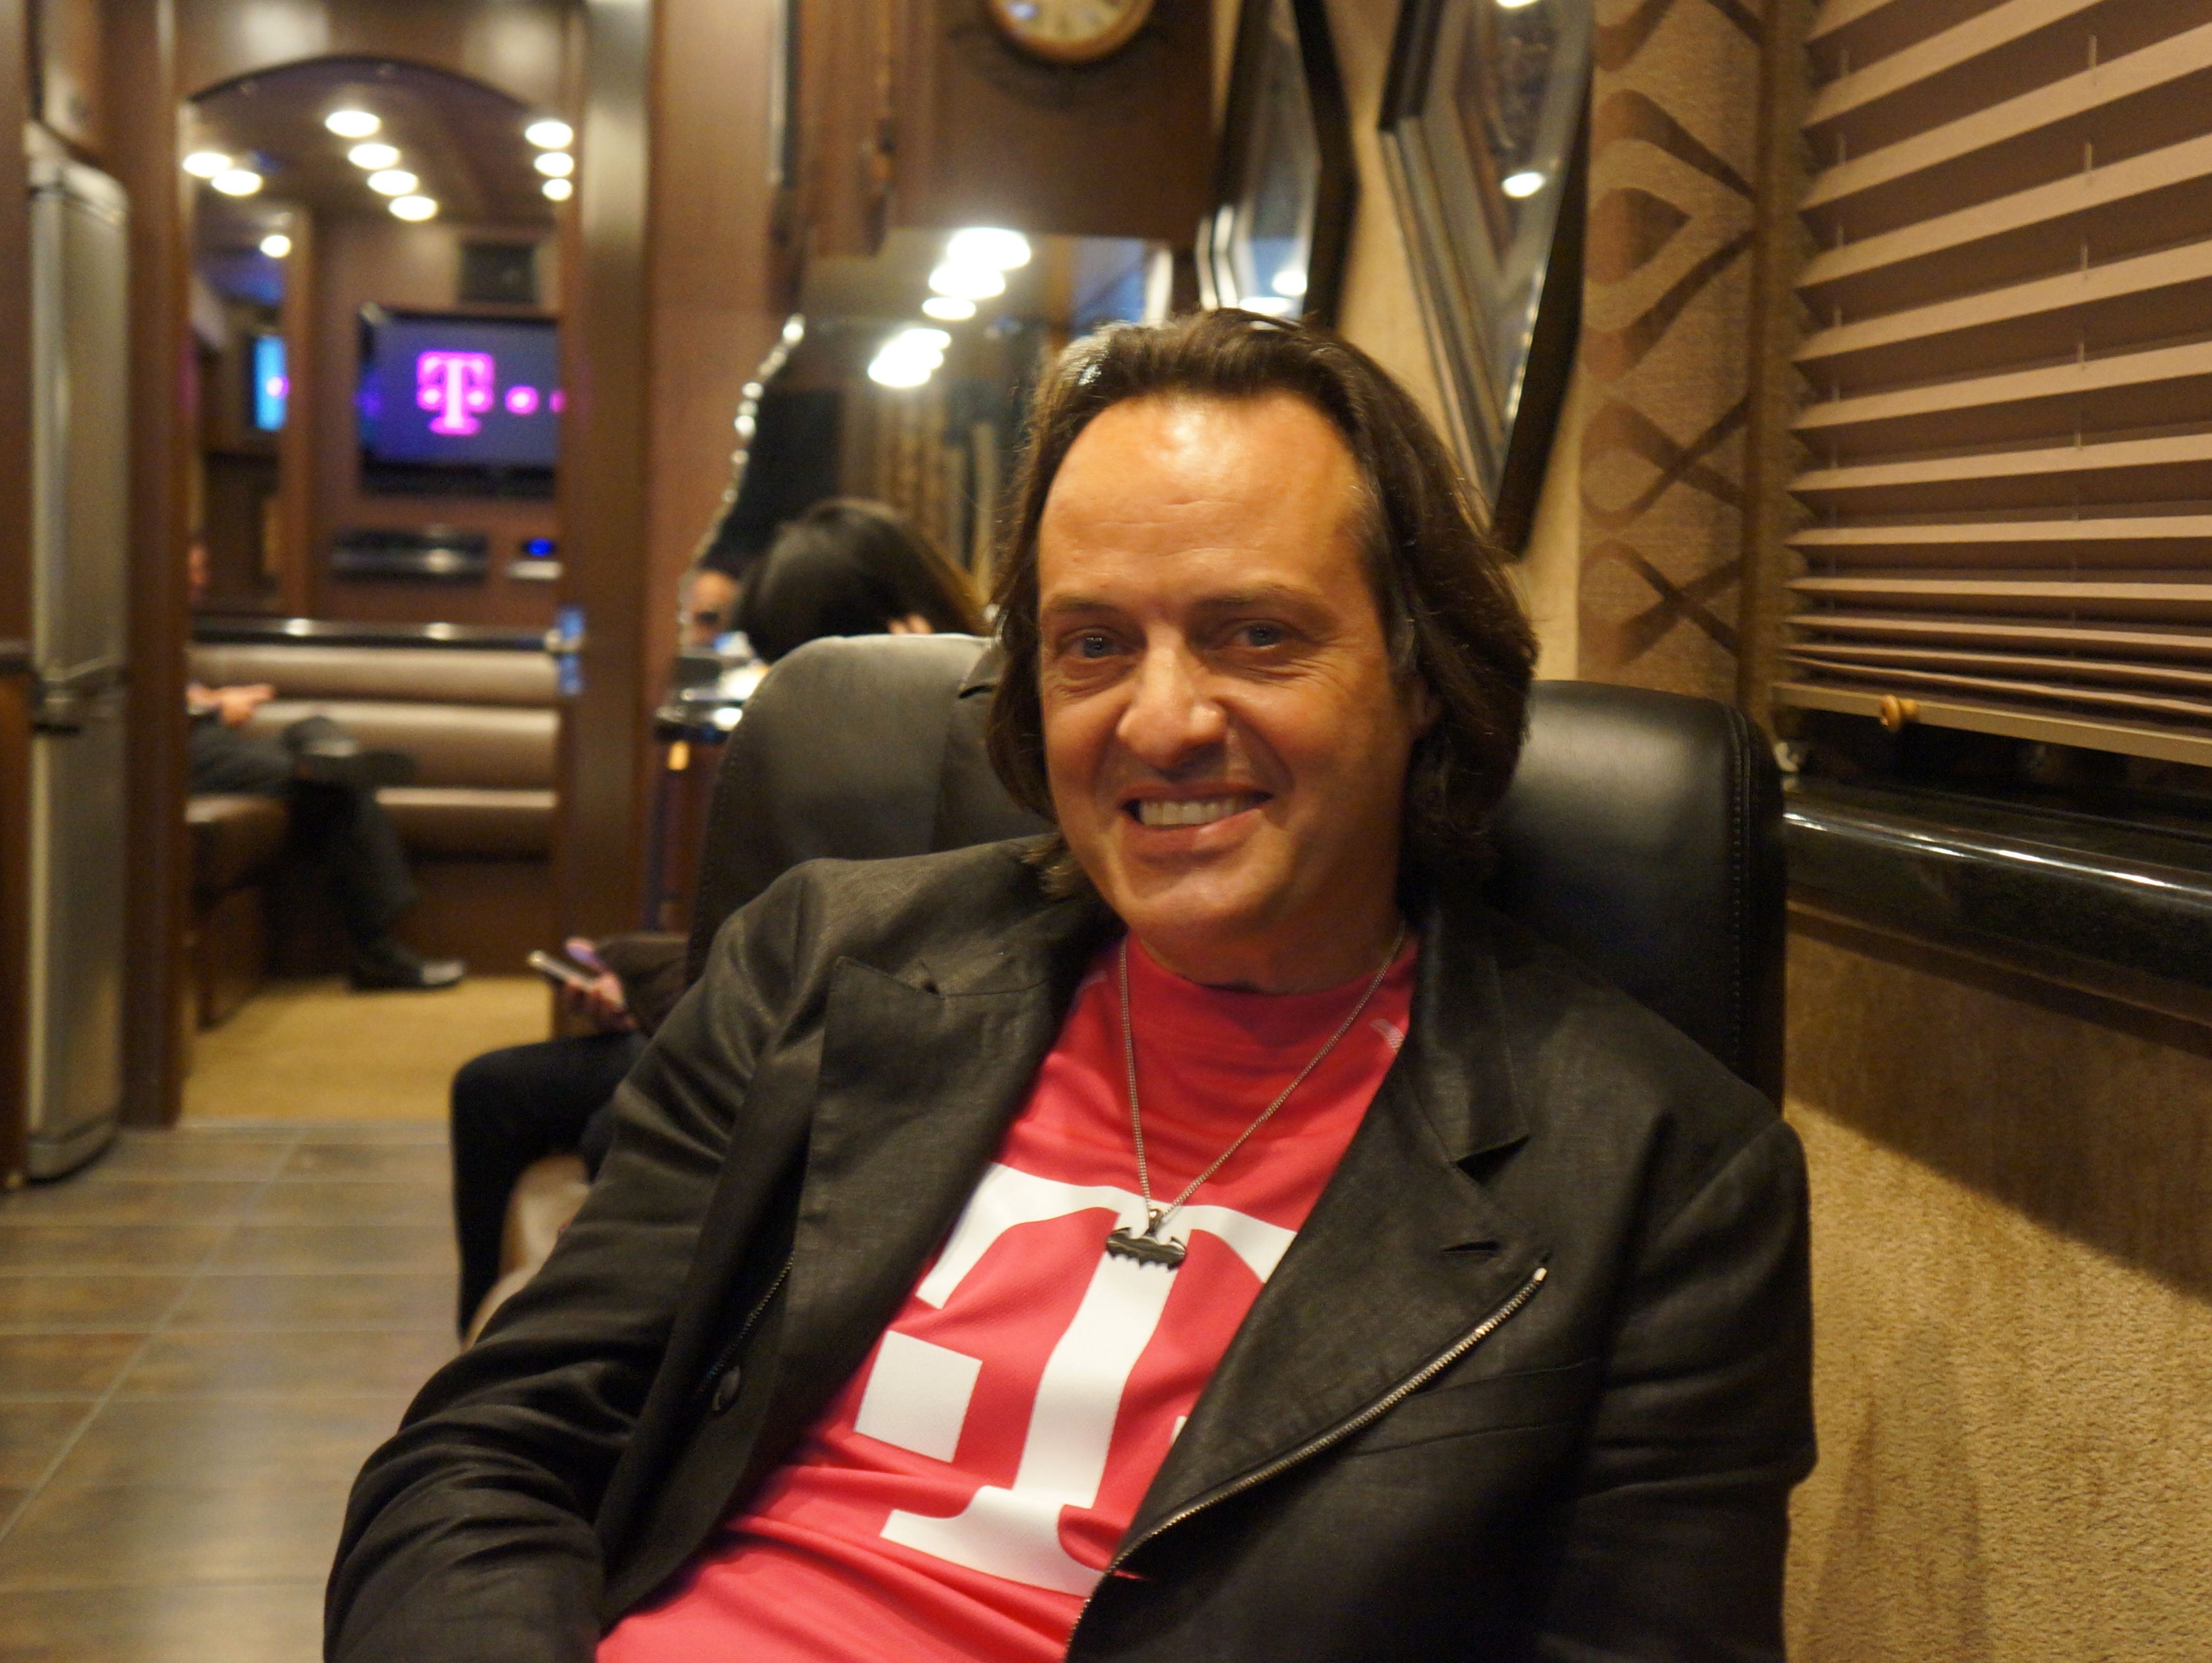 John Legere, T-Mobile CEO, says 